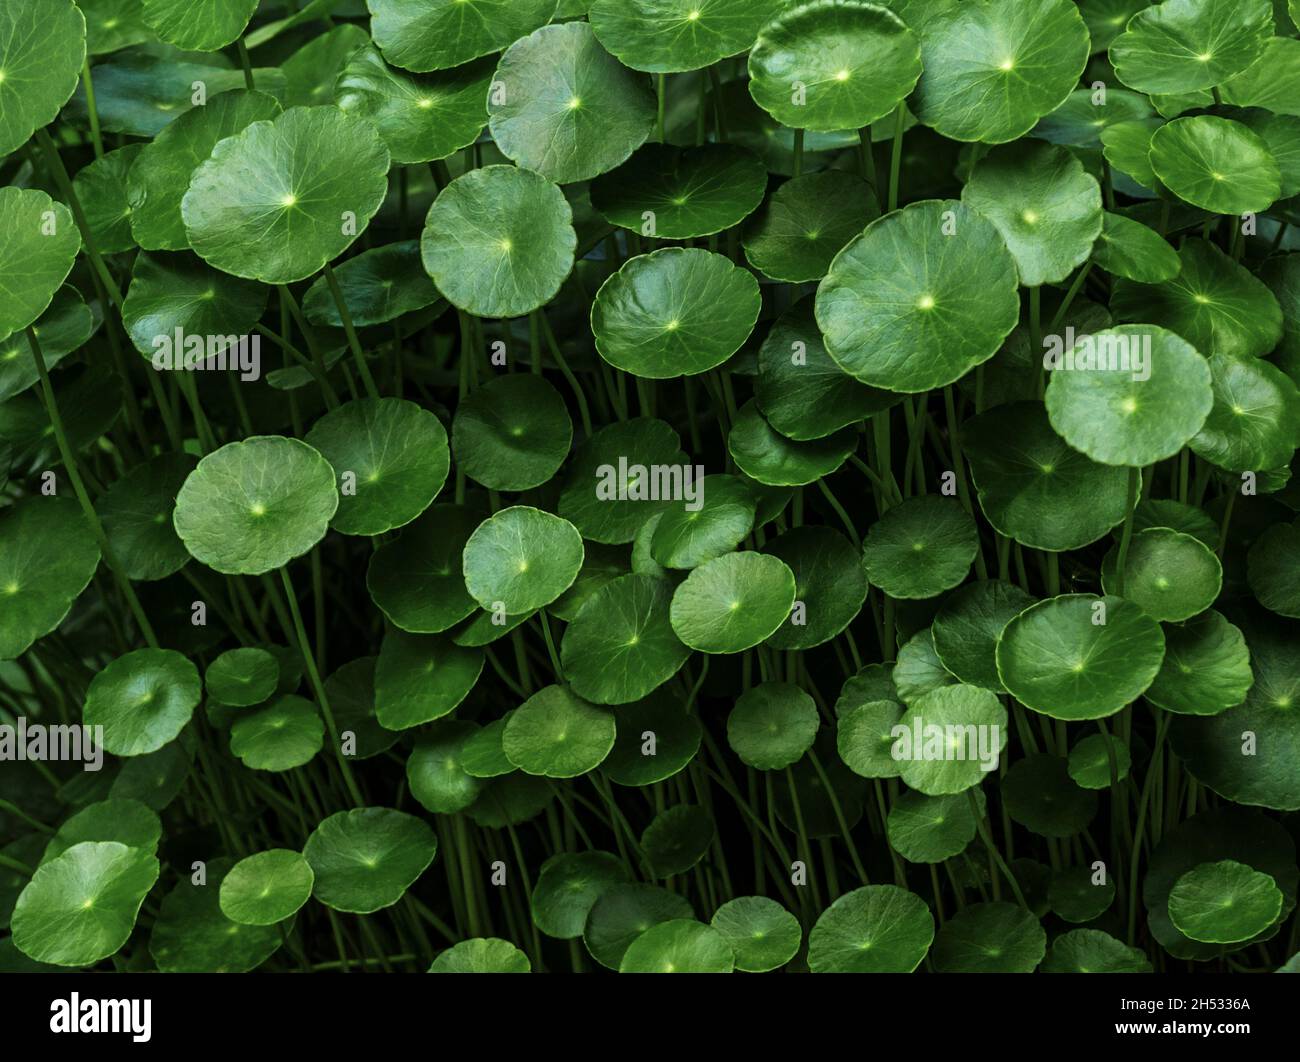 Leaves of Hydrocotyle umbellate in the garden Stock Photo